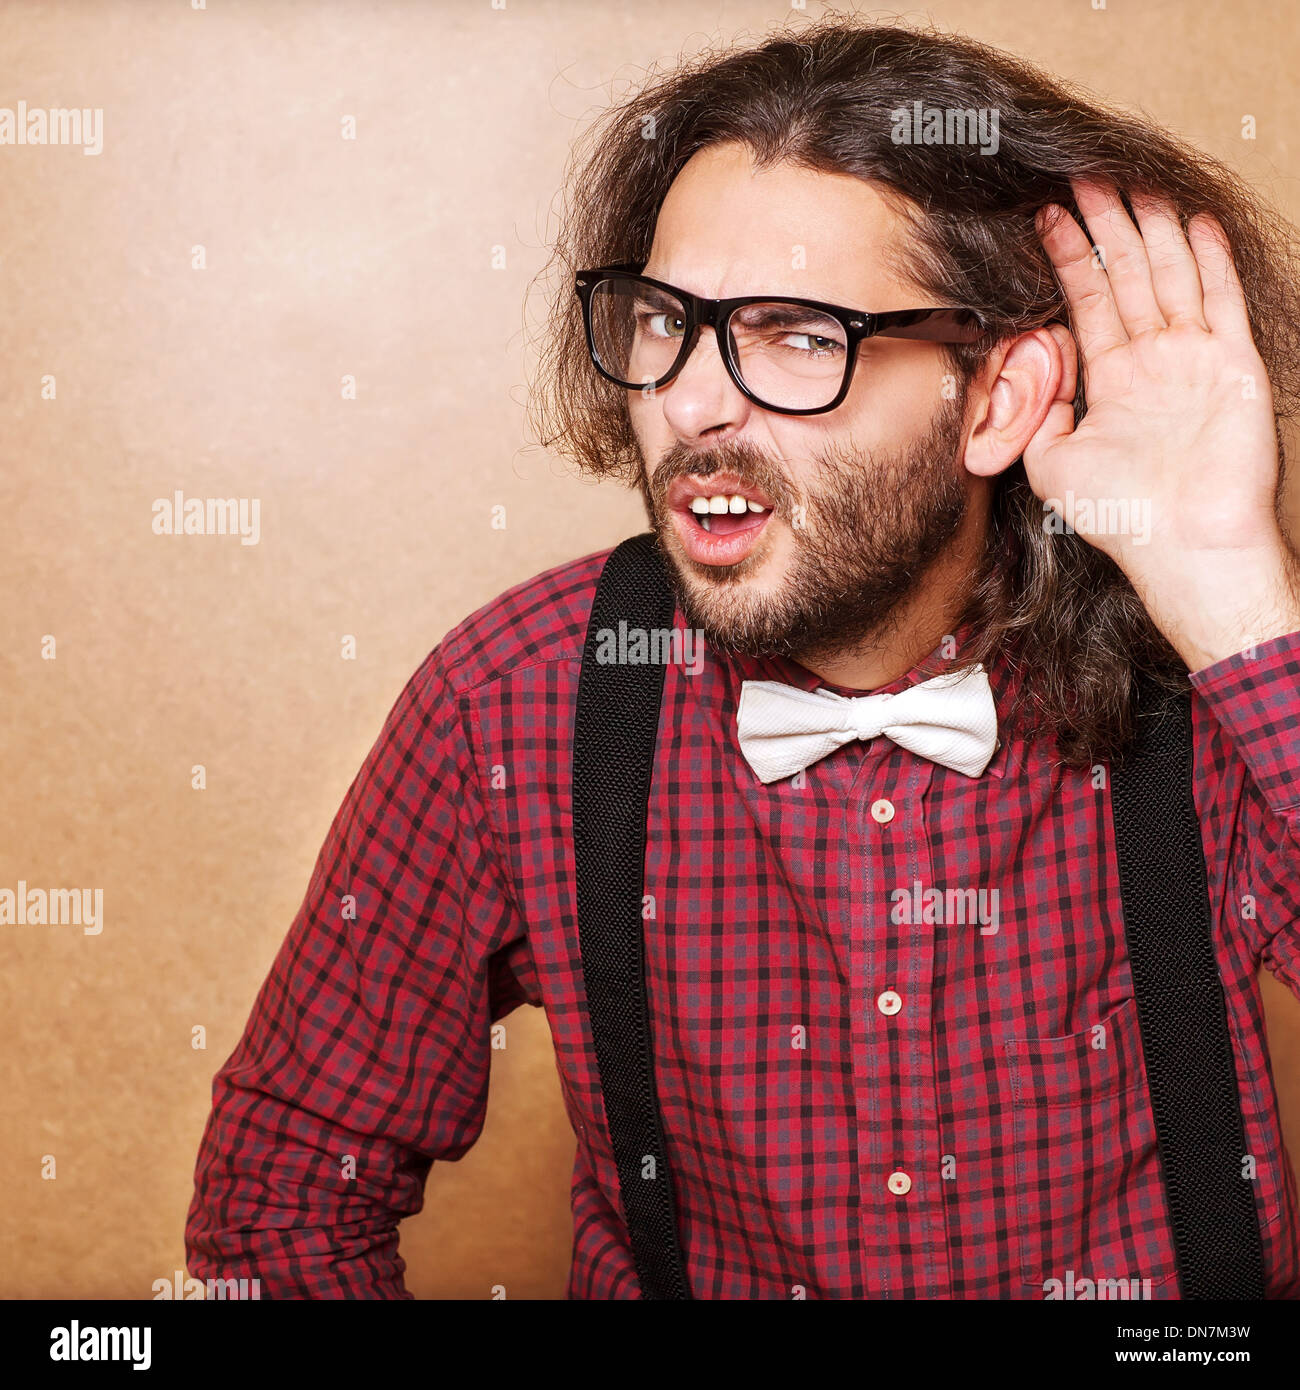 Emotional portrait of a guy who is trying to hear each other, hipster Style, studio shot. Stock Photo